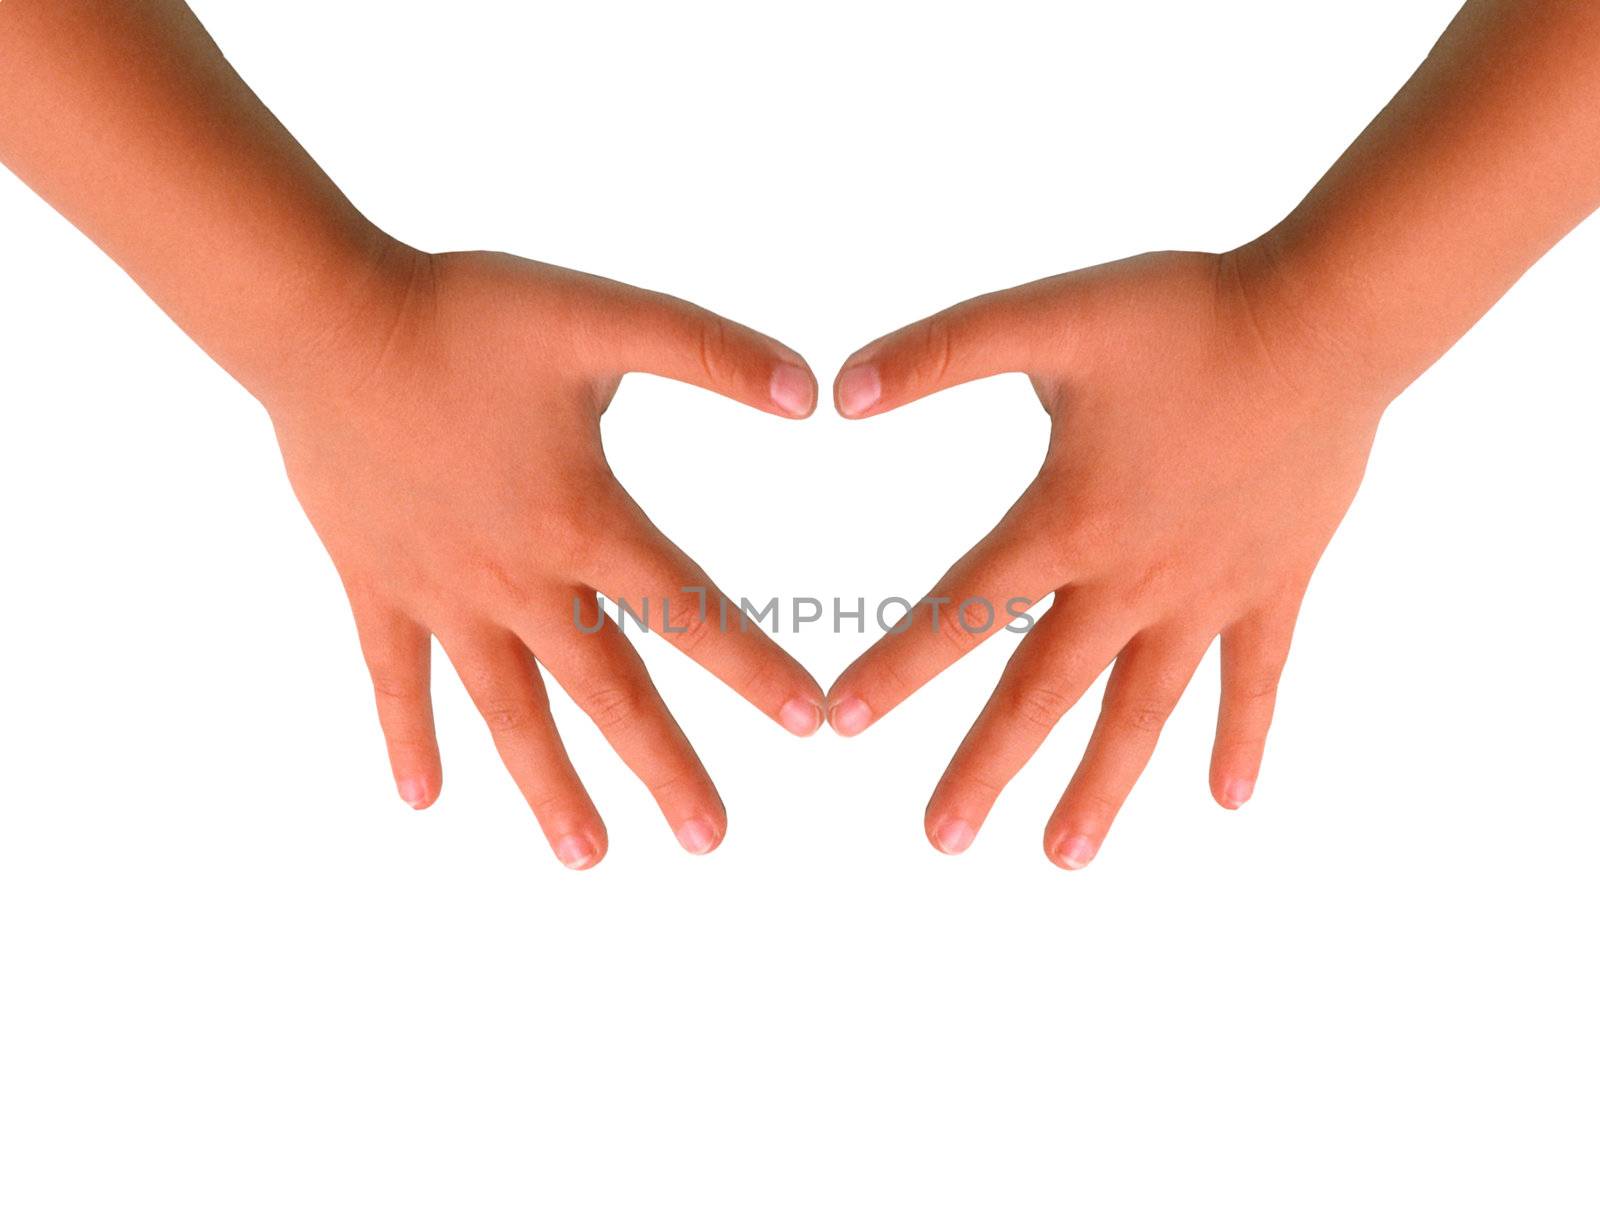 Baby's hands like a small heart on the white background